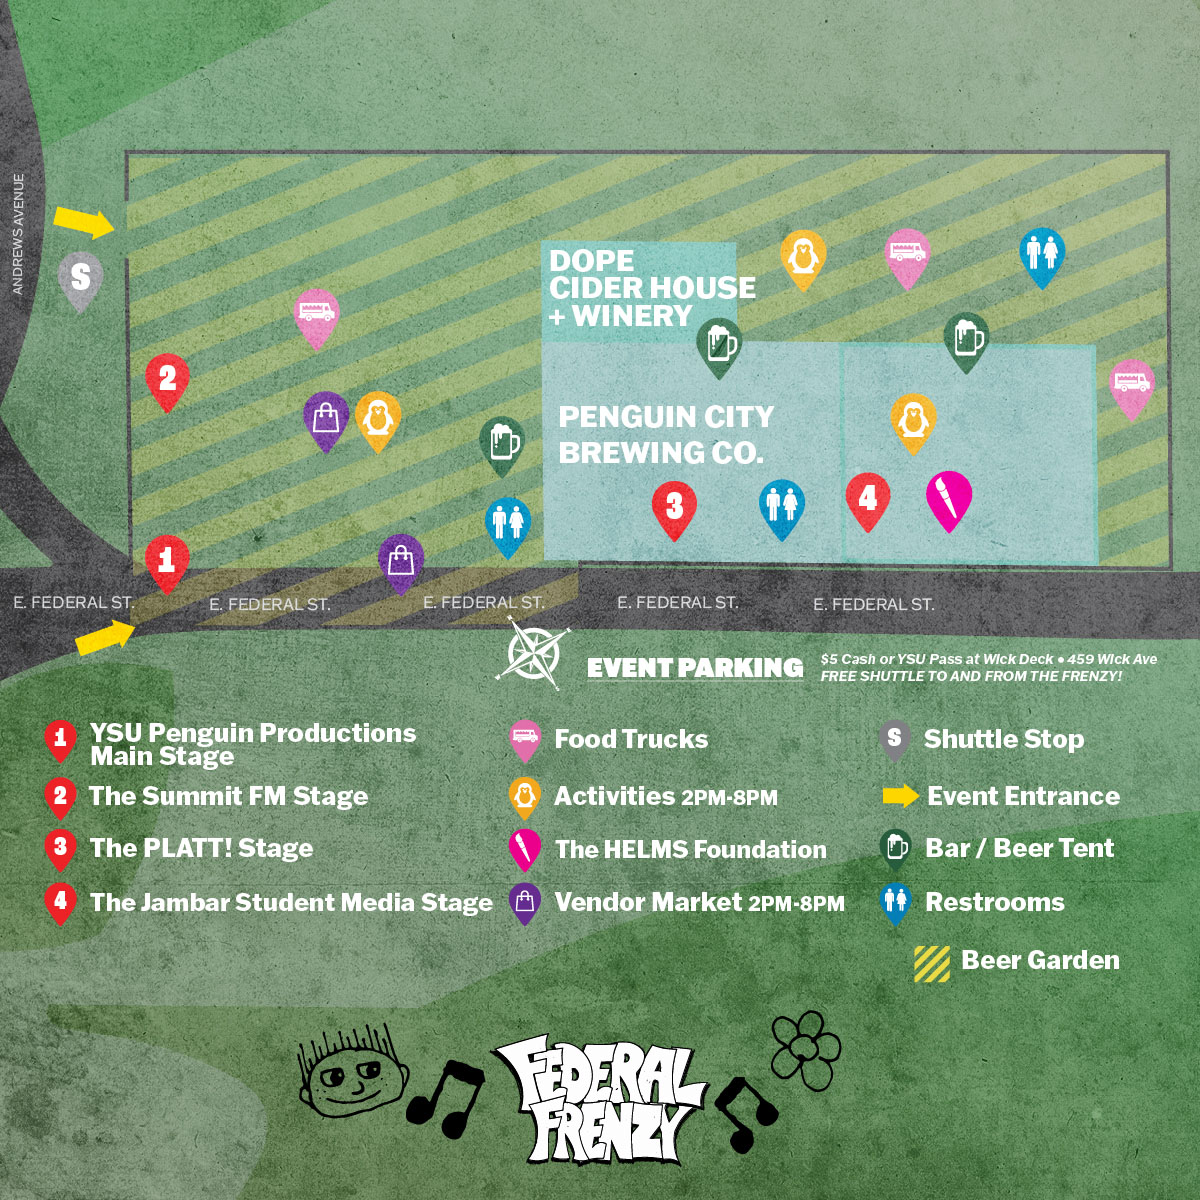 map with entrance, stages, food, activities, vendor market, shuttle stop, beer tent, restrooms, etc.